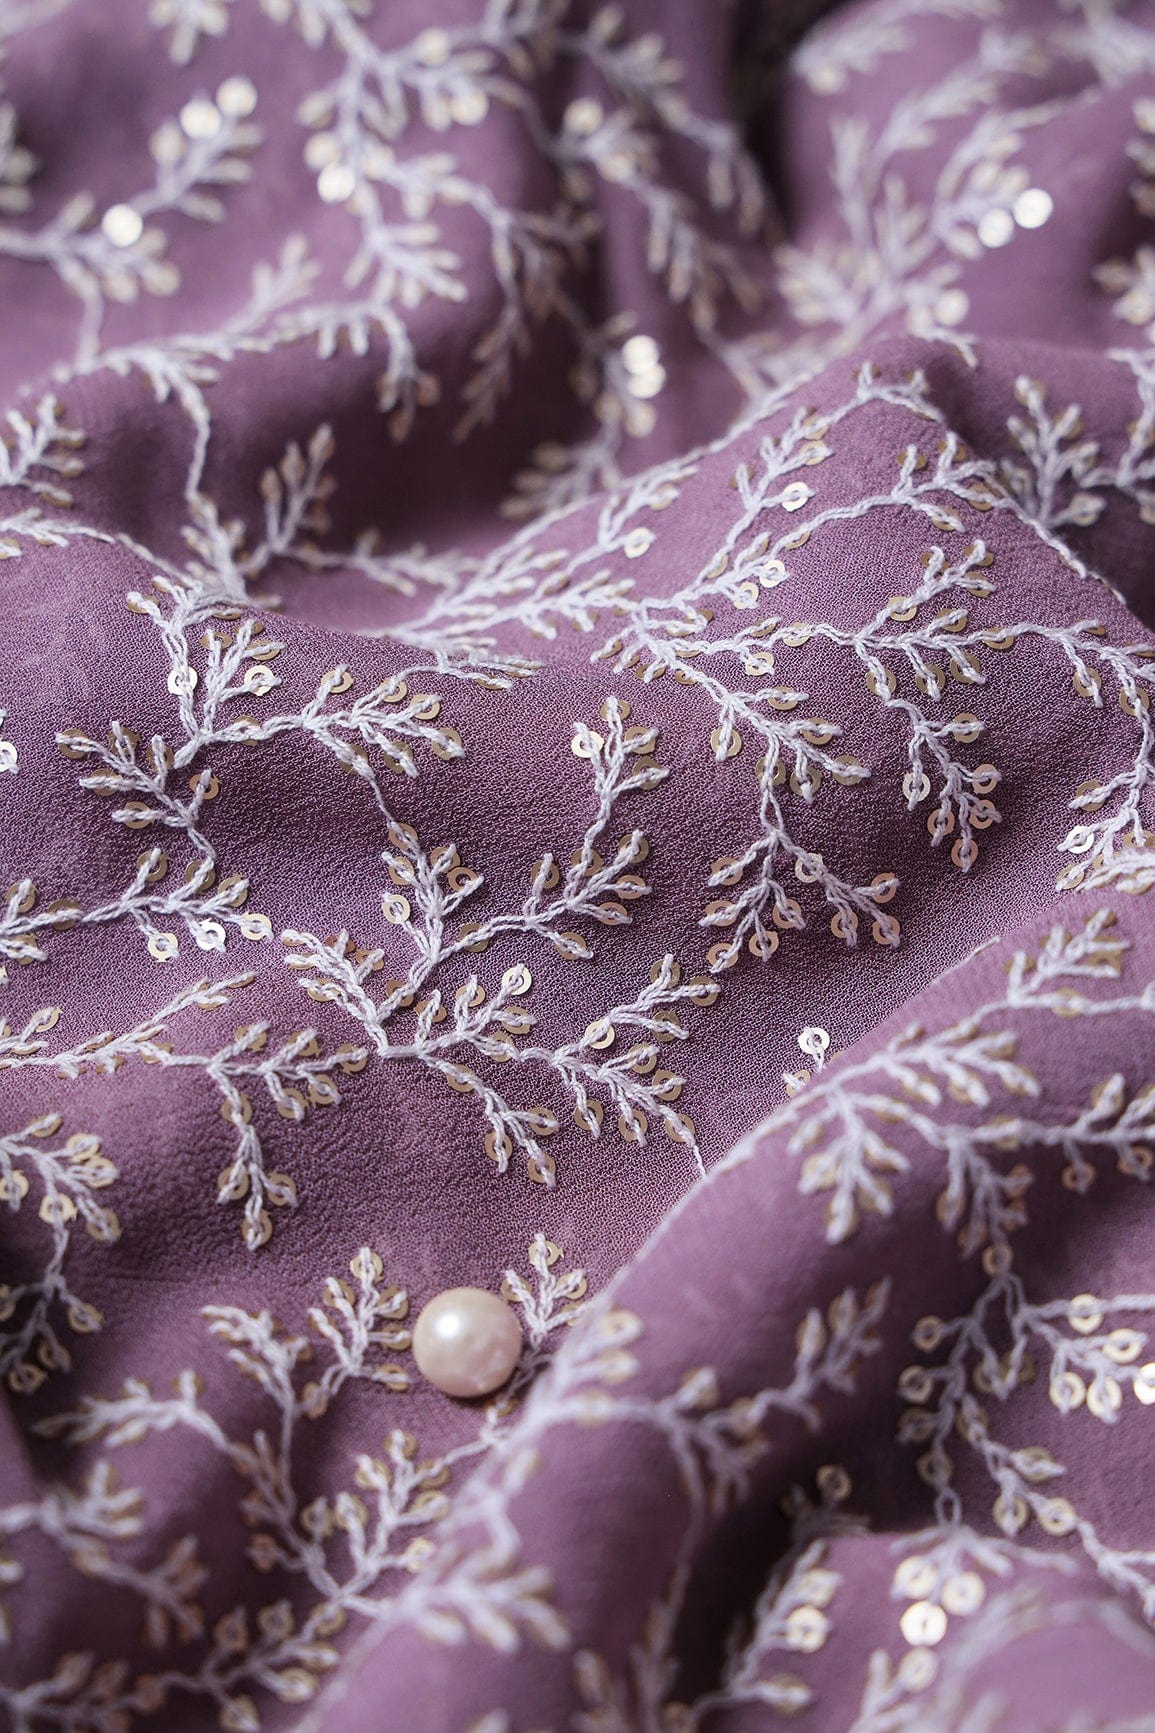 doeraa Plain Fabrics White Thread With Gold Sequins Leafy Embroidery Work On Mauve Viscose Georgette Fabric